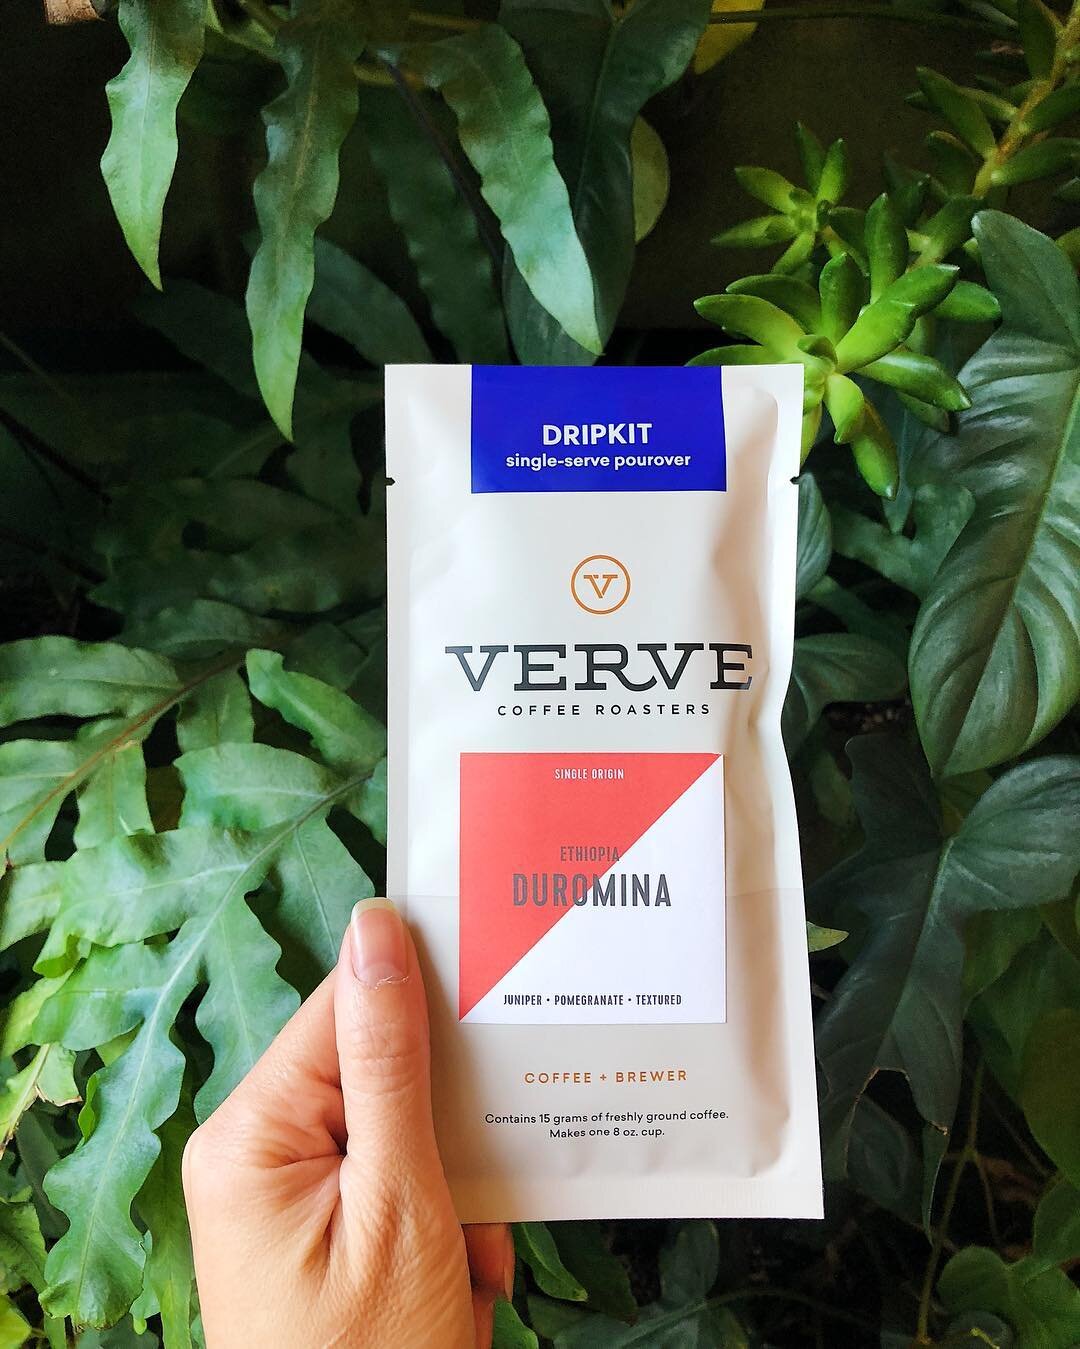 Sooo excited to try this travel-friendly, single-serving pour-over from my fave @vervecoffee (DTLA on 8th + Spring)! It&rsquo;s coming CAMPING with us! Just elevated our camping game. It&rsquo;s gonna be in-tents ⛺️.
.
.
.
#vervecoffee #dripkitcoffee